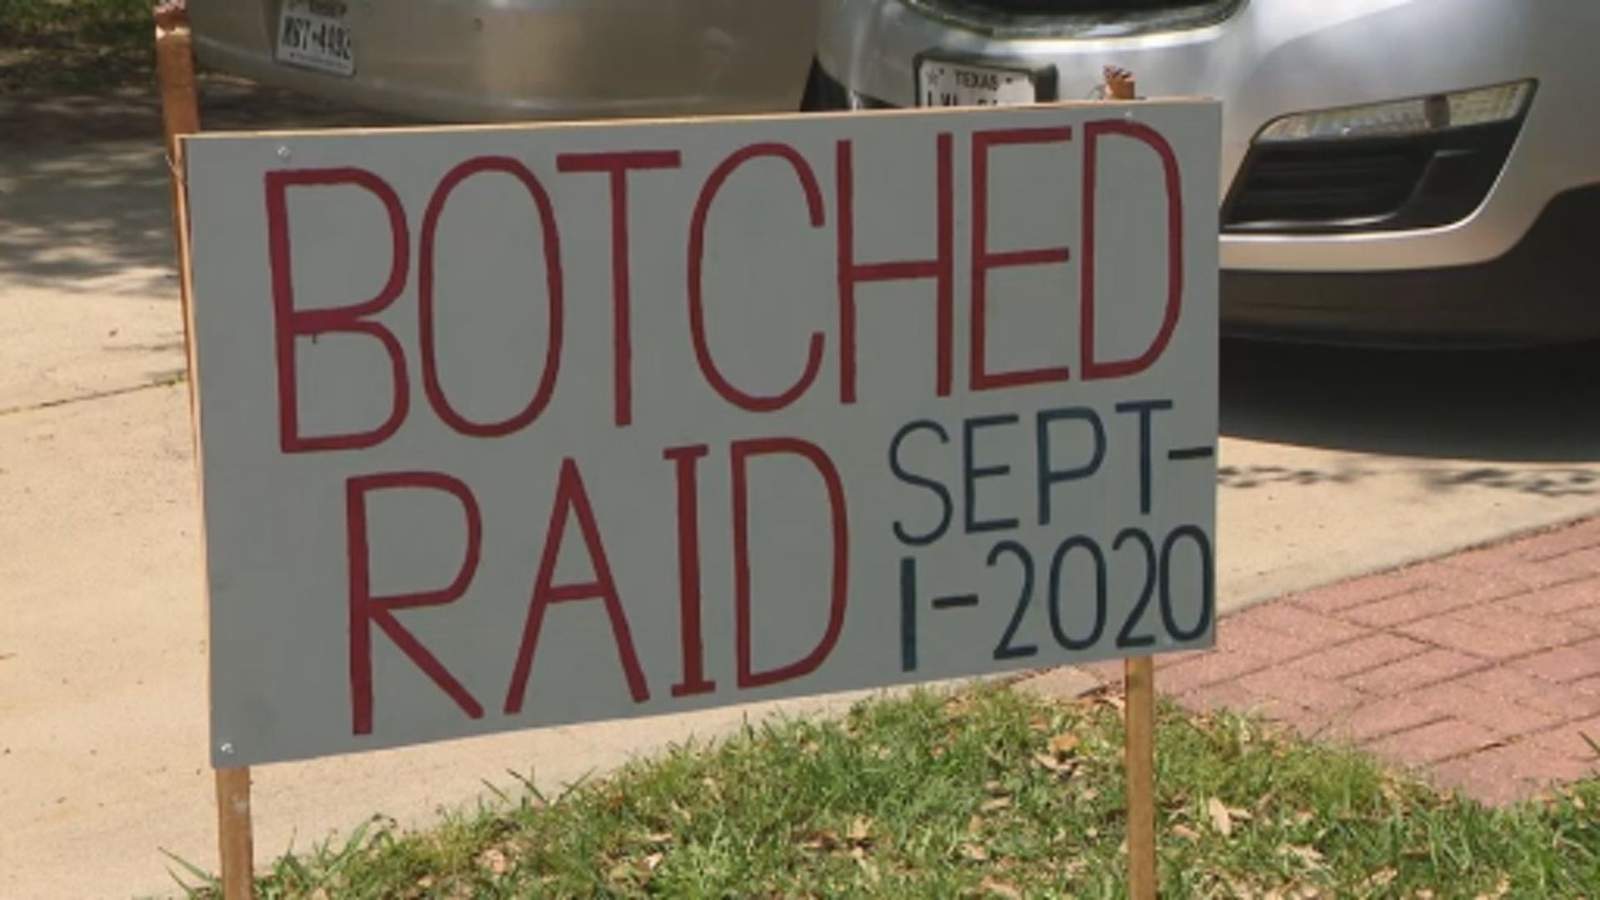 HOA says homeowner must remove sign that reads ‘Botched Raid Sept. 1, 2020′